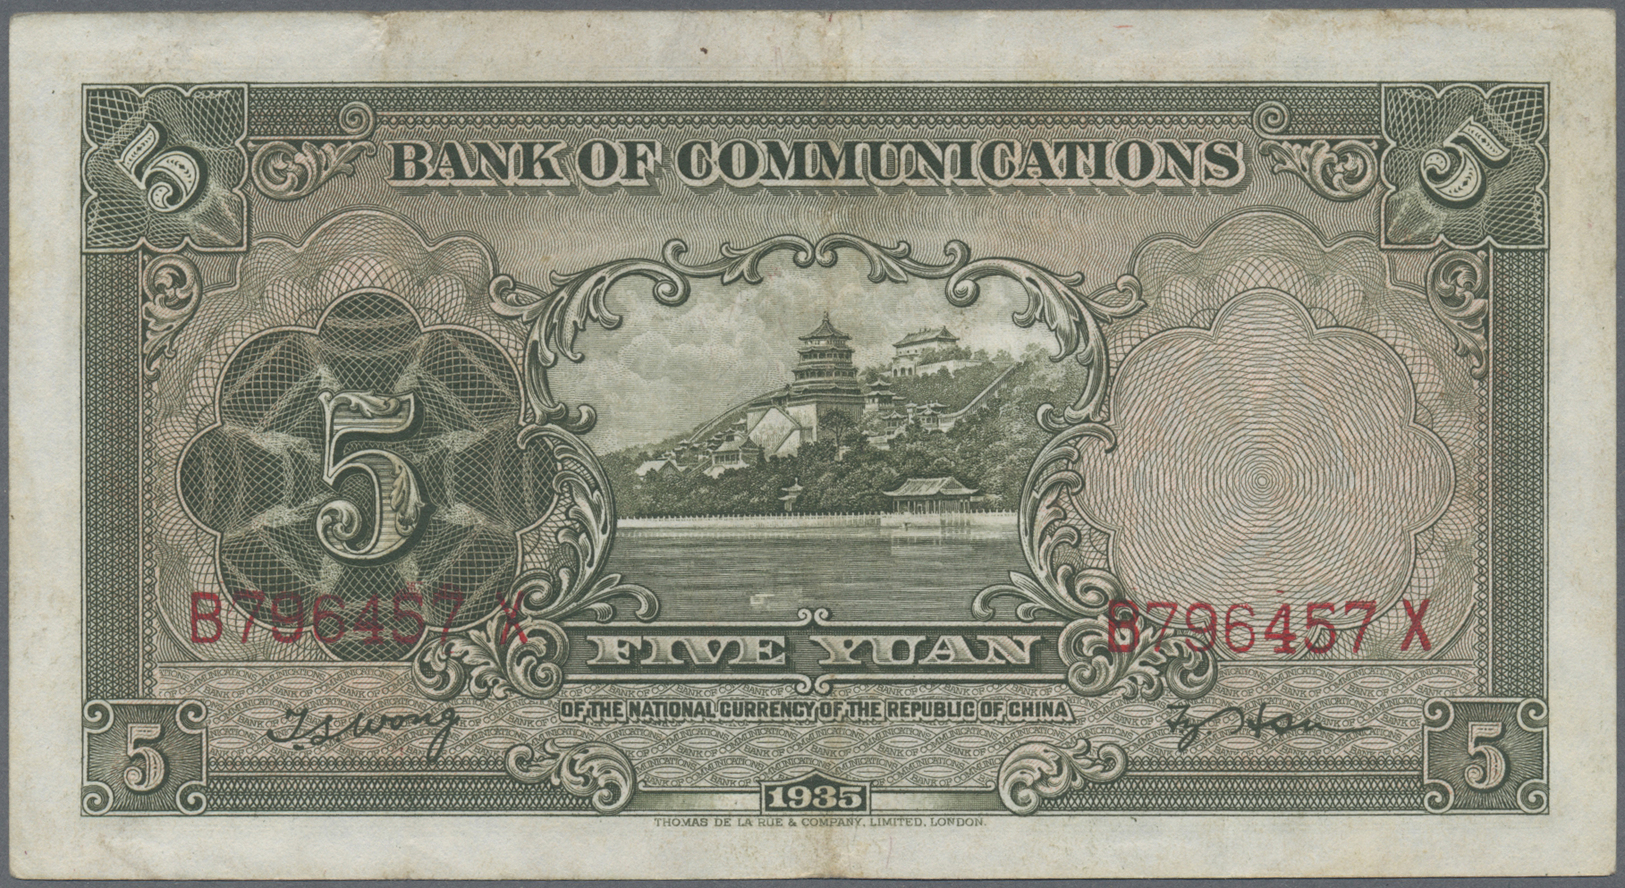 03542 China: 1935/40, four banknotes: Bank of Communications $5 1935, Bank of China $100 1940, Central Bank of China $5